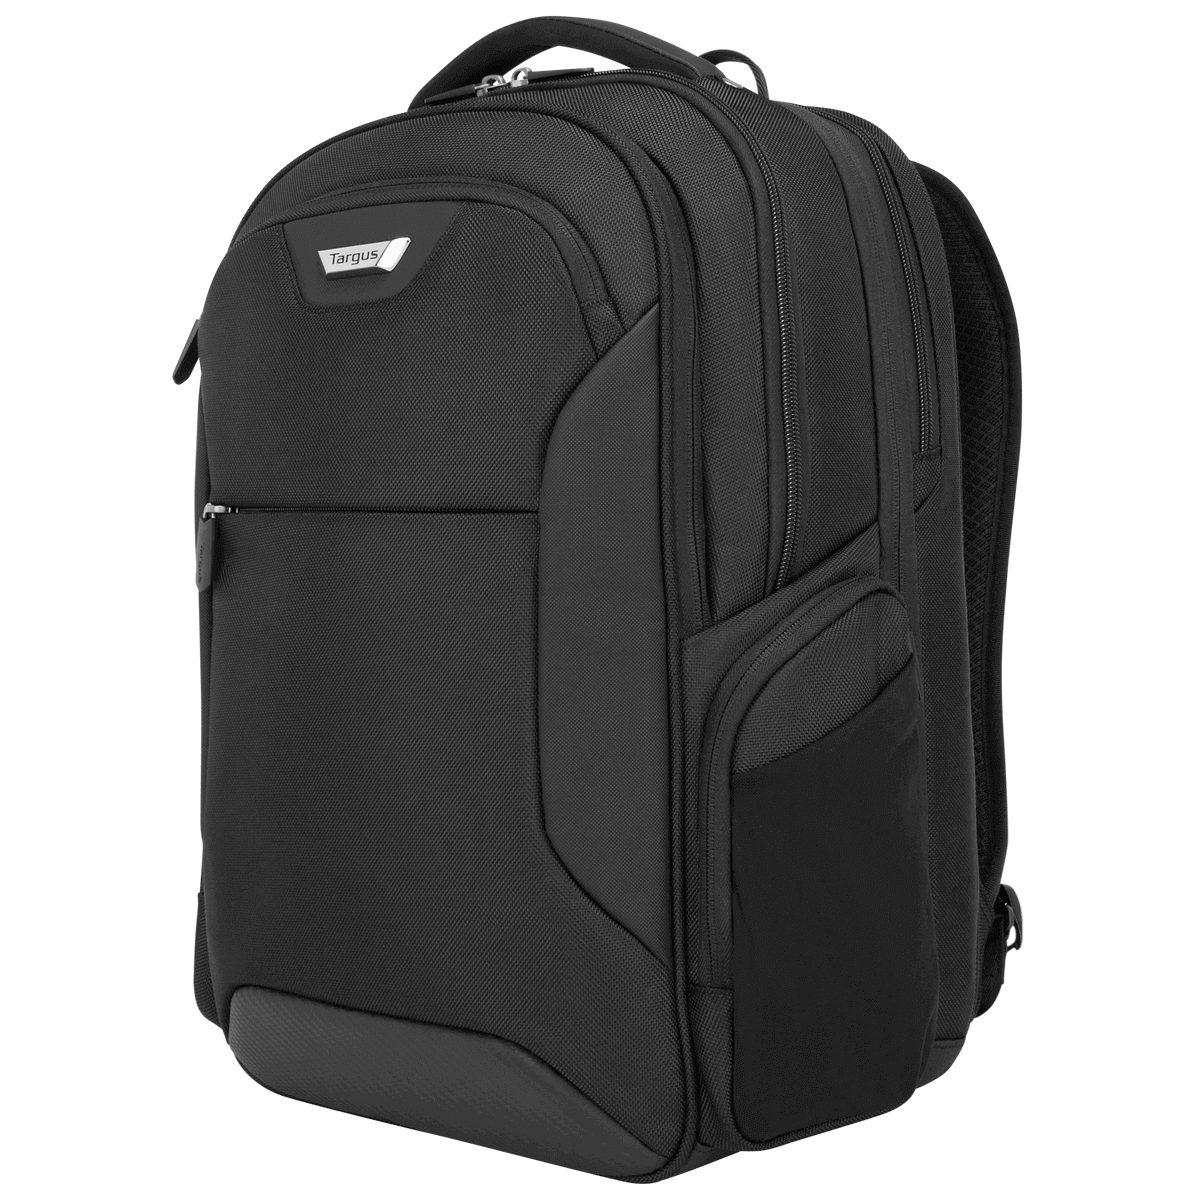 Spruce EcoSmart 15.6-inch Checkpoint-Friendly Backpack | Targus